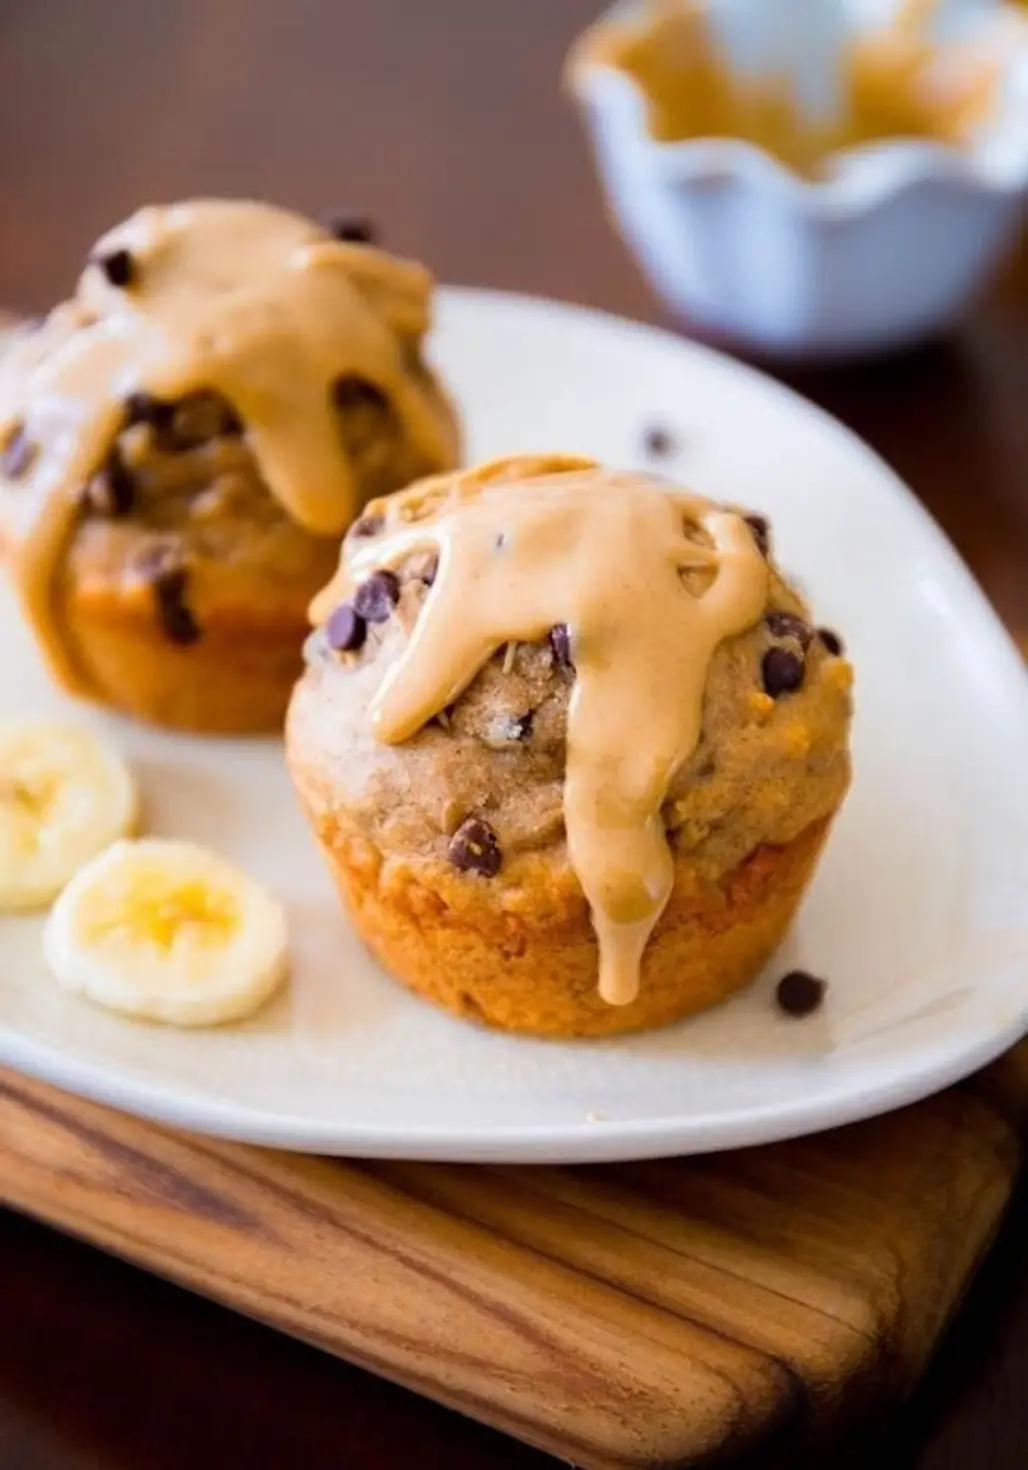 Homemade Muffins with Nut Butter